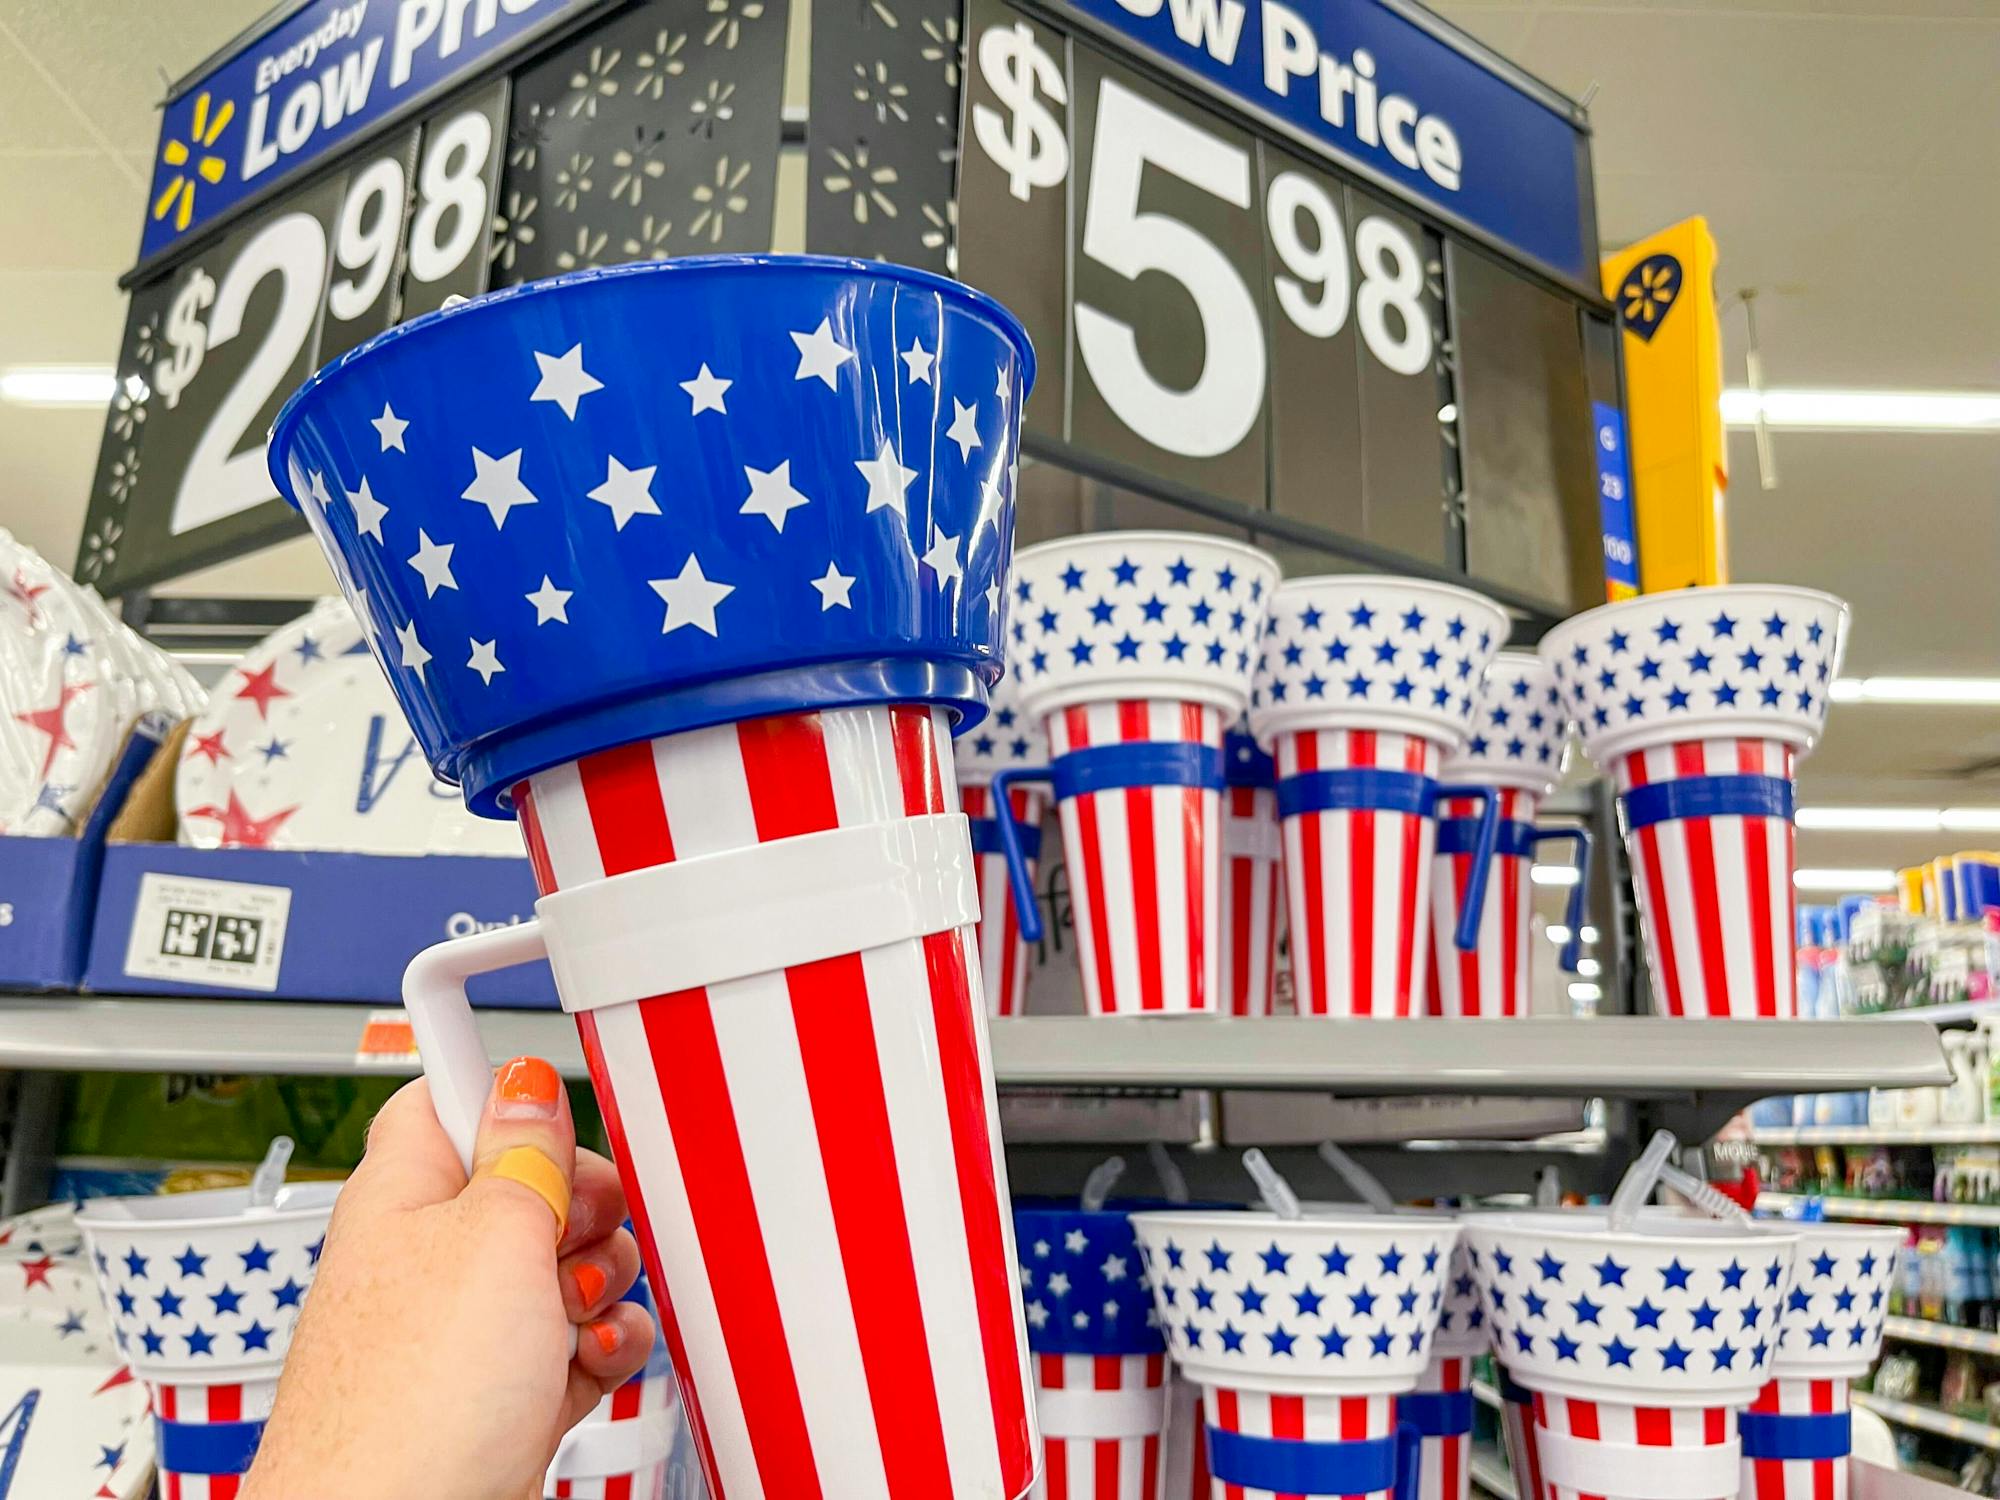 Walmart 4th of July Essentials To Help You Party 5.98 Stadium Tumbler